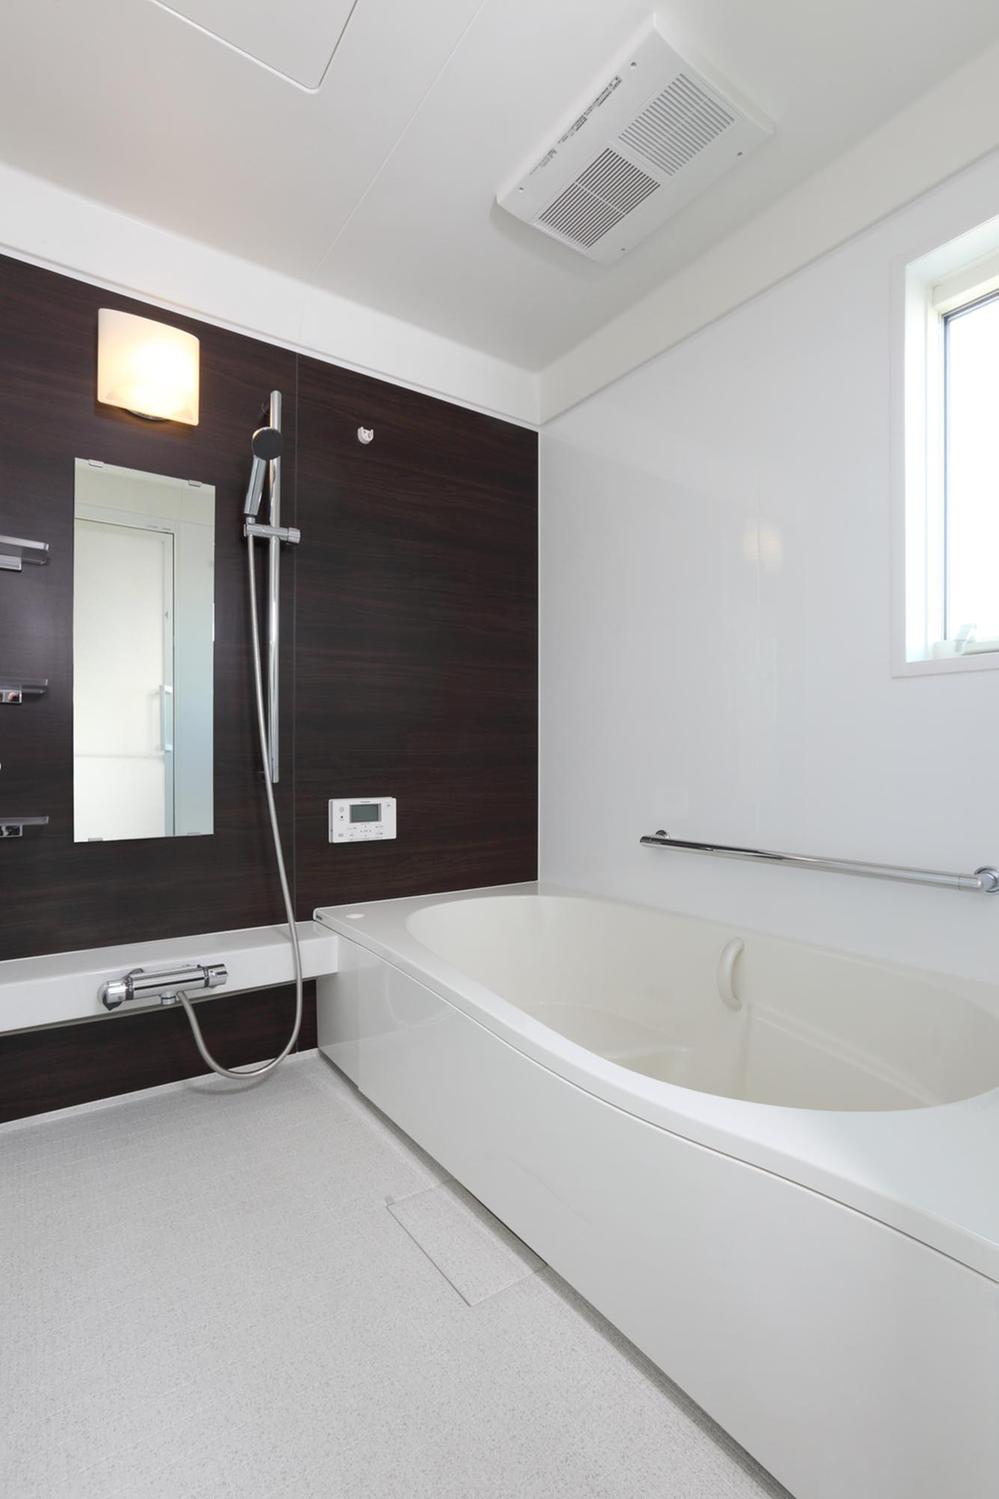 Bathroom.  ■ PanaHome bathroom Heating ・ Cool breeze ・ Drying ・ Equipped with ventilation year-round comfortable bathing Hot water is cold difficult economical vacuum insulation bathtub